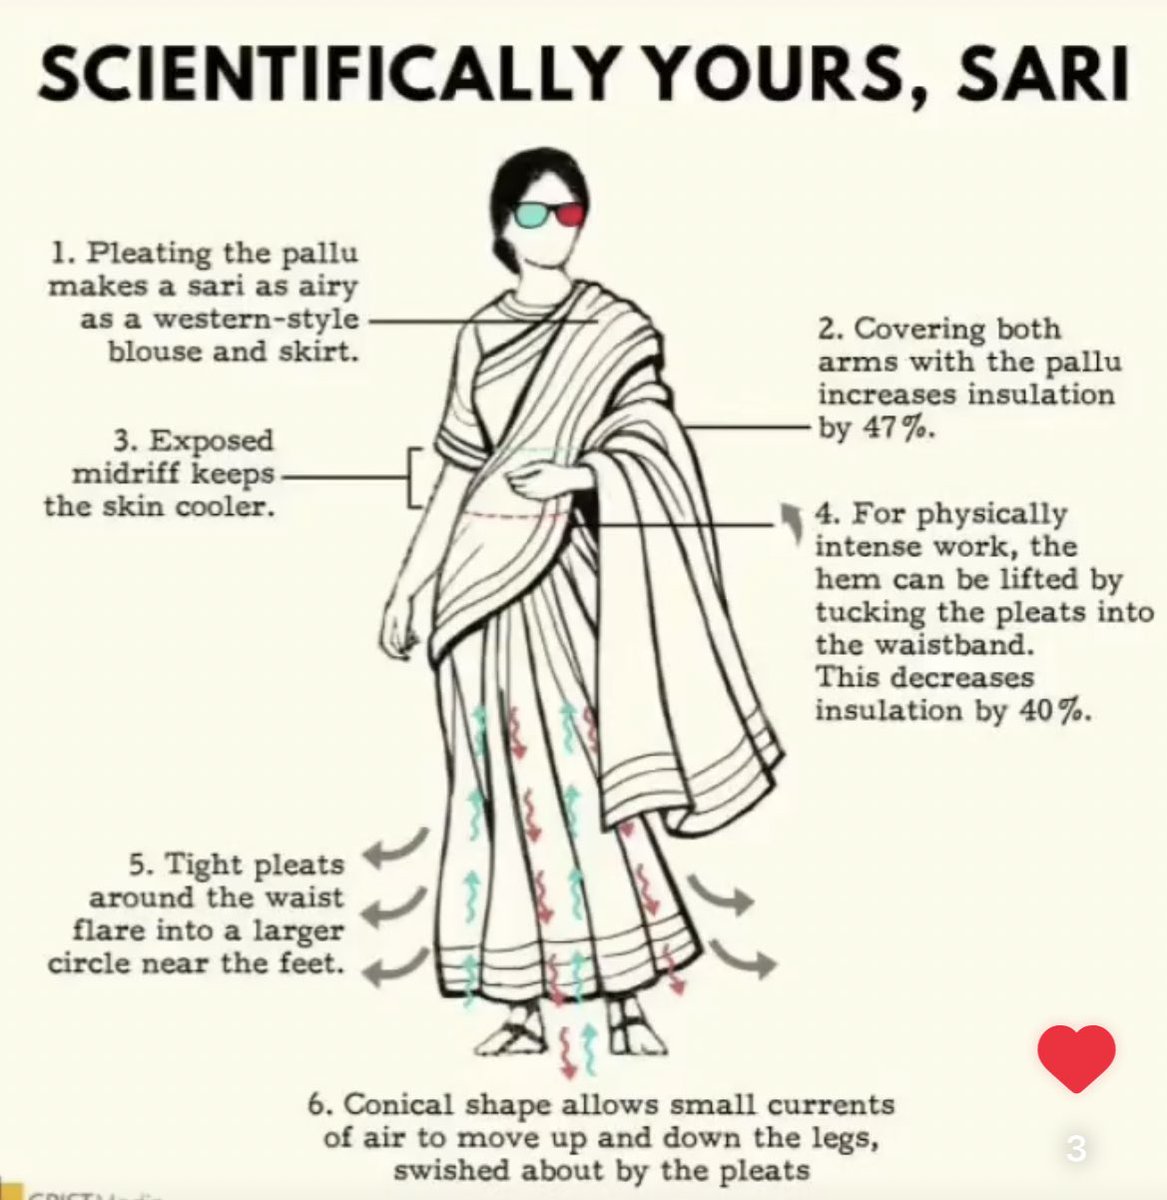 If anything, saree suits any weather! Intelligence is expected from Education institutions and top leaders

#SareeDay #Malaysia No to #Racism #Saree